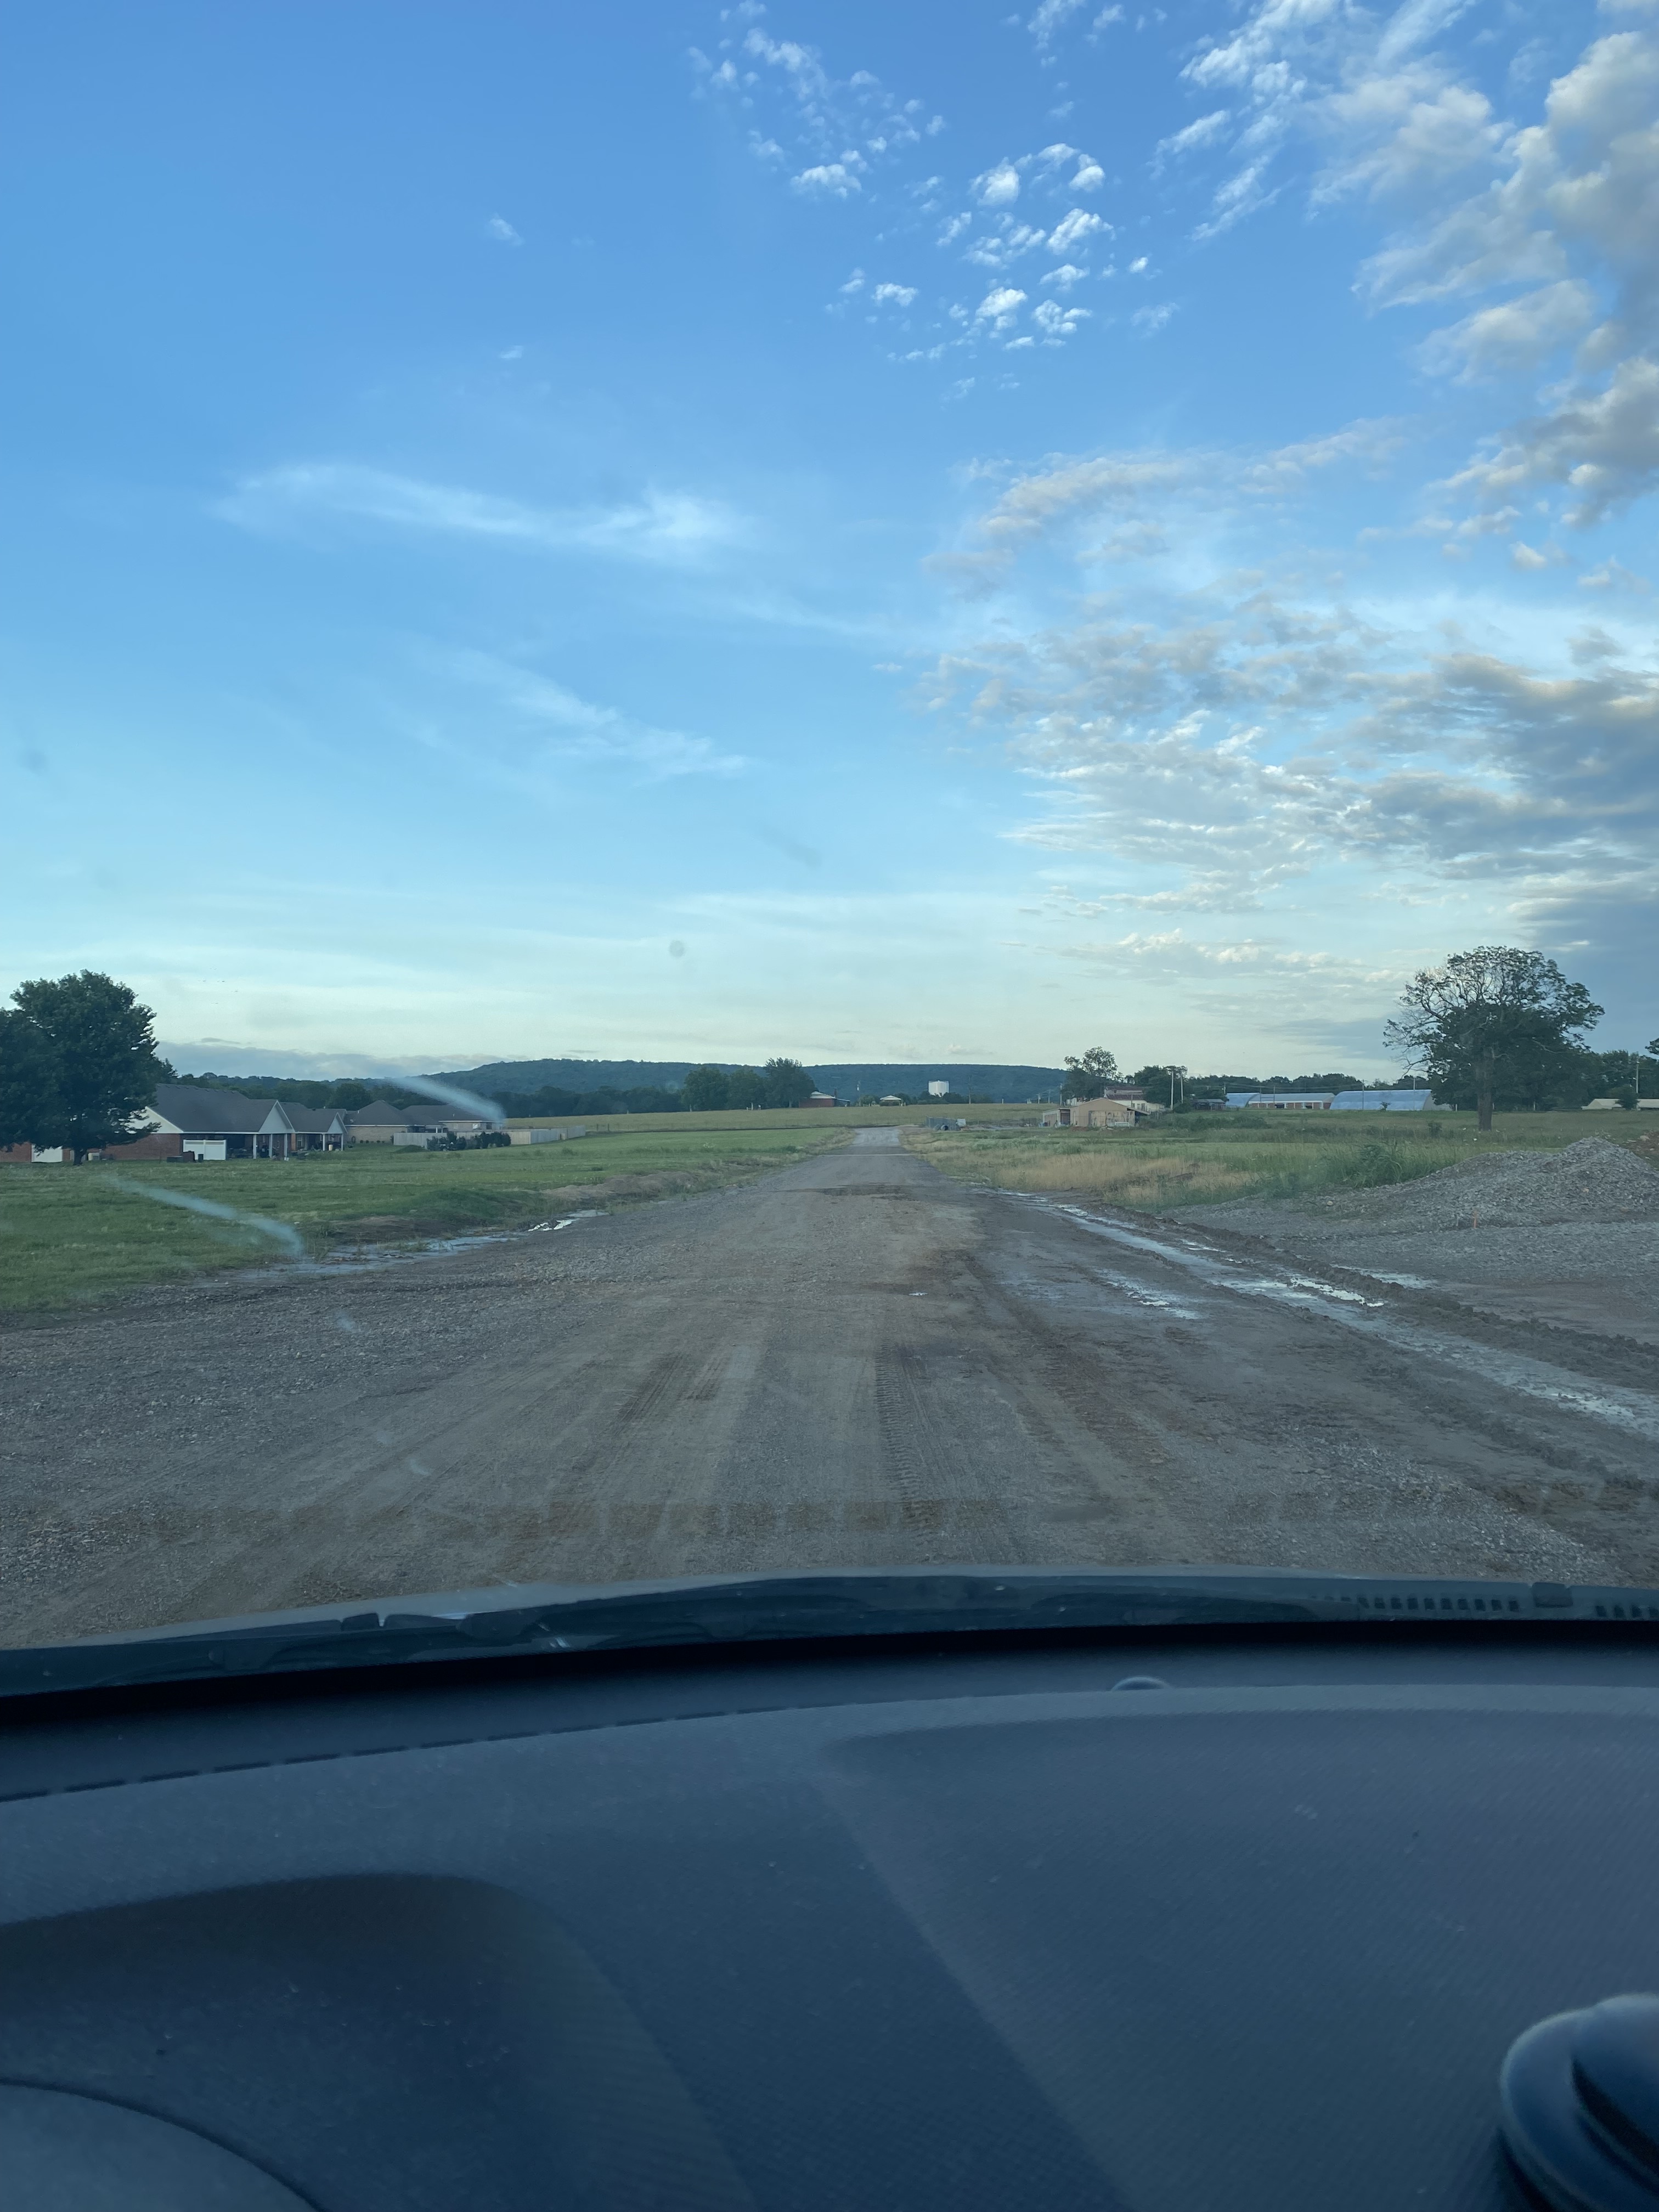 A photo taken from the front seat of a car. Beyond the dashboard, through the windshield, a long dirt road extends into the distance, surrounded by fields, with a couple houses here and there. Big blue sky with a few tray clouds.